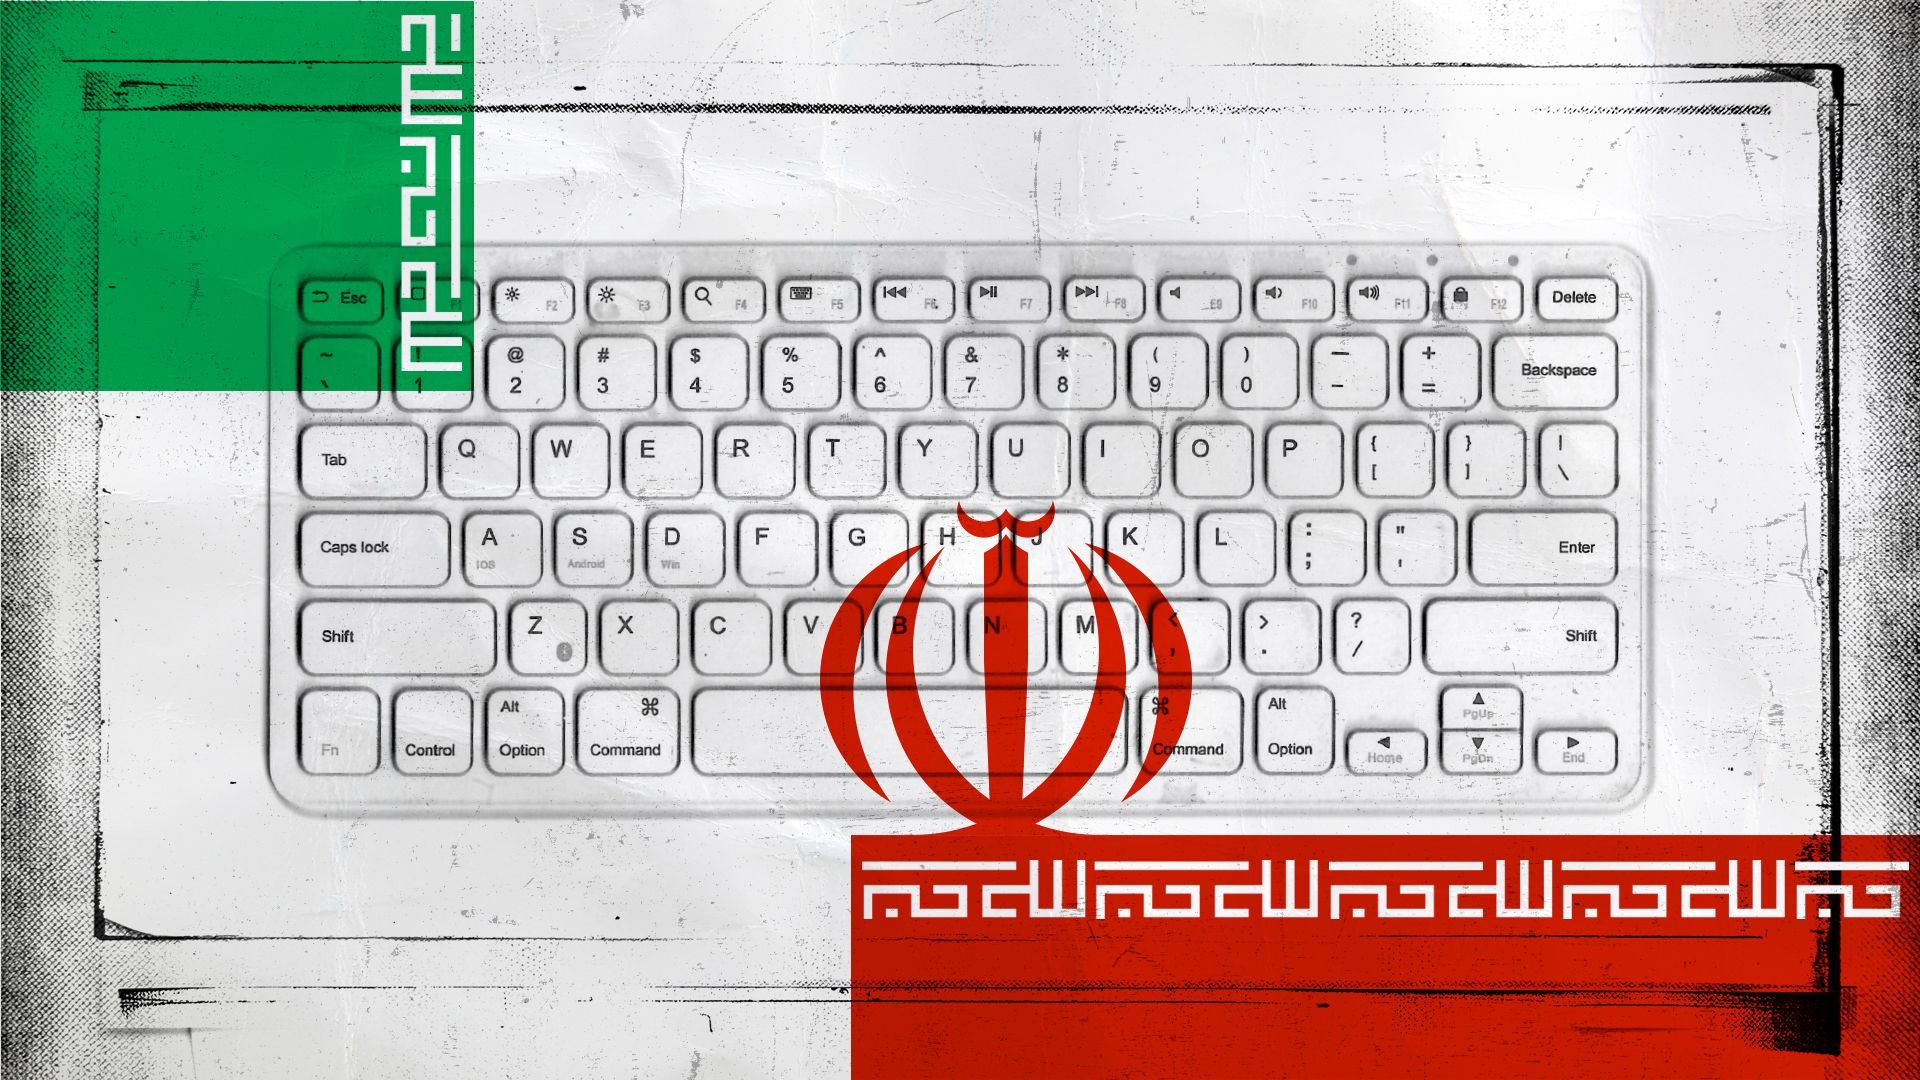 Illustration of a photocopied image of a keyboard with elements of the Iranian flag.